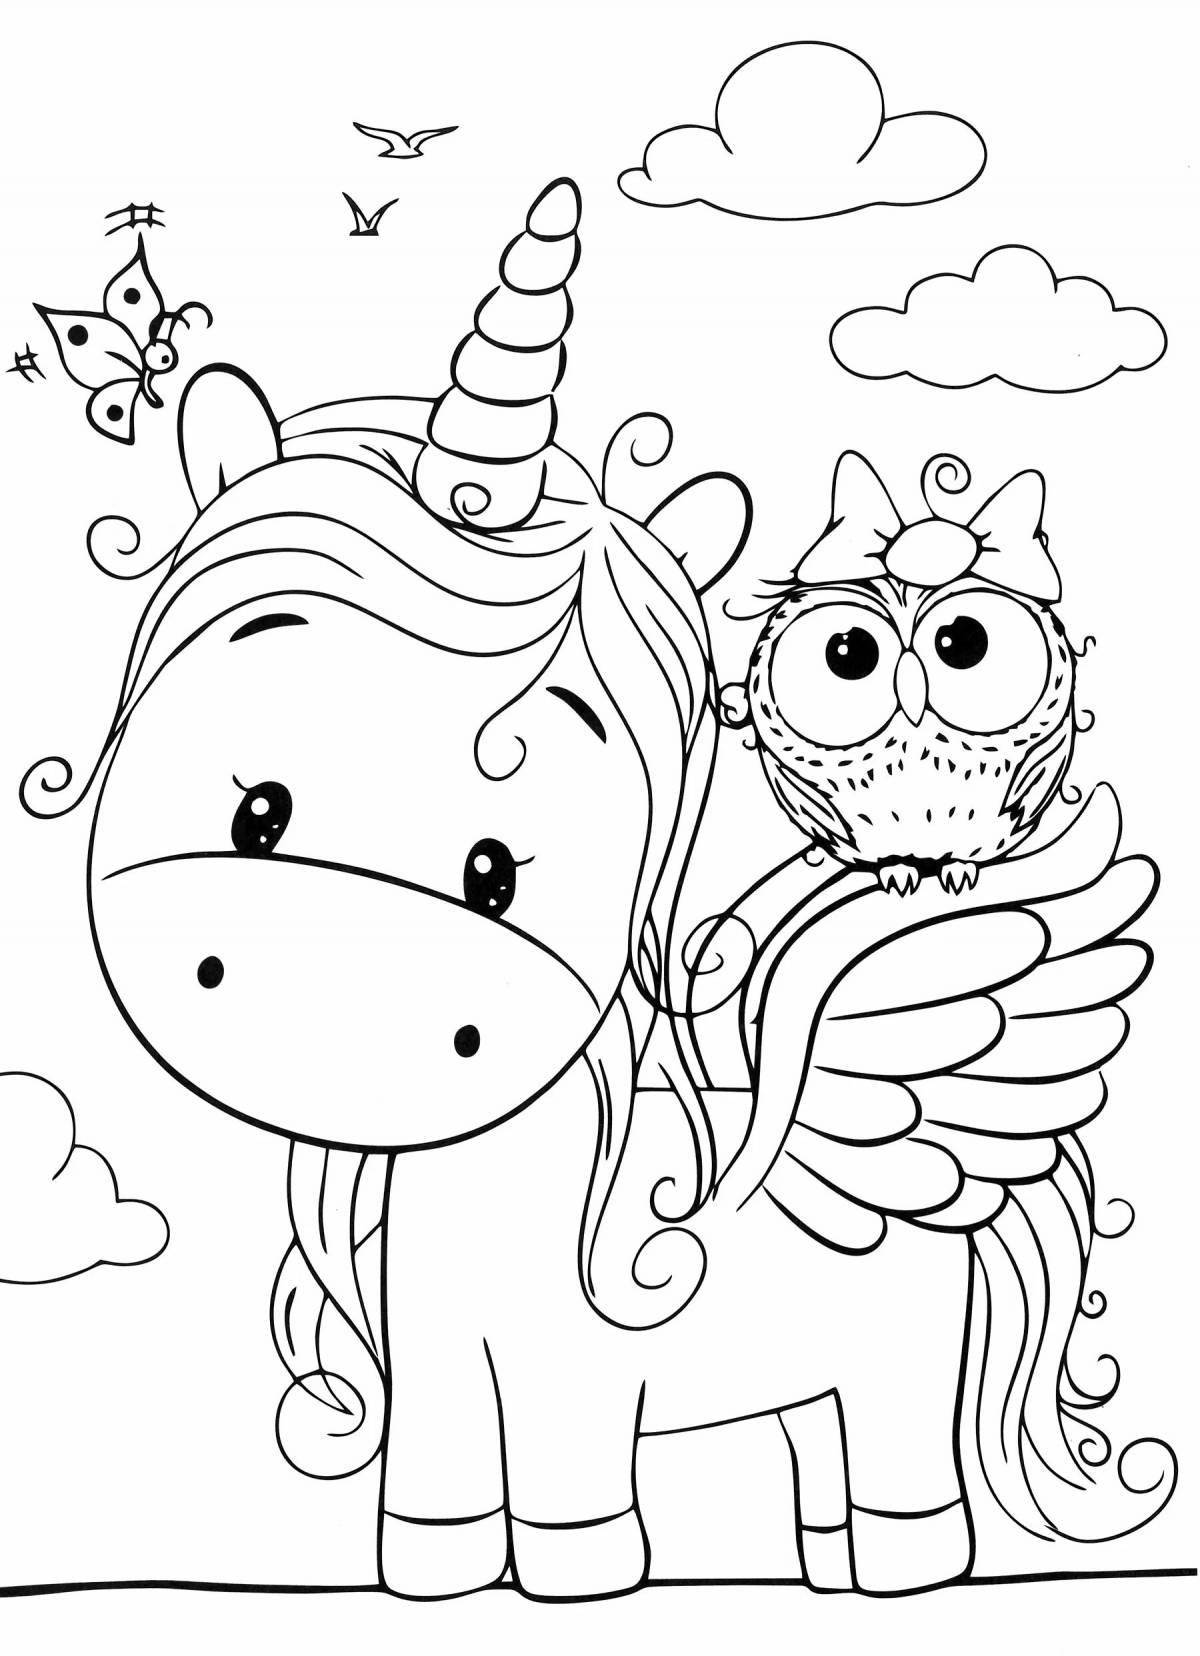 Radiant coloring book for girls 7 years old unicorn